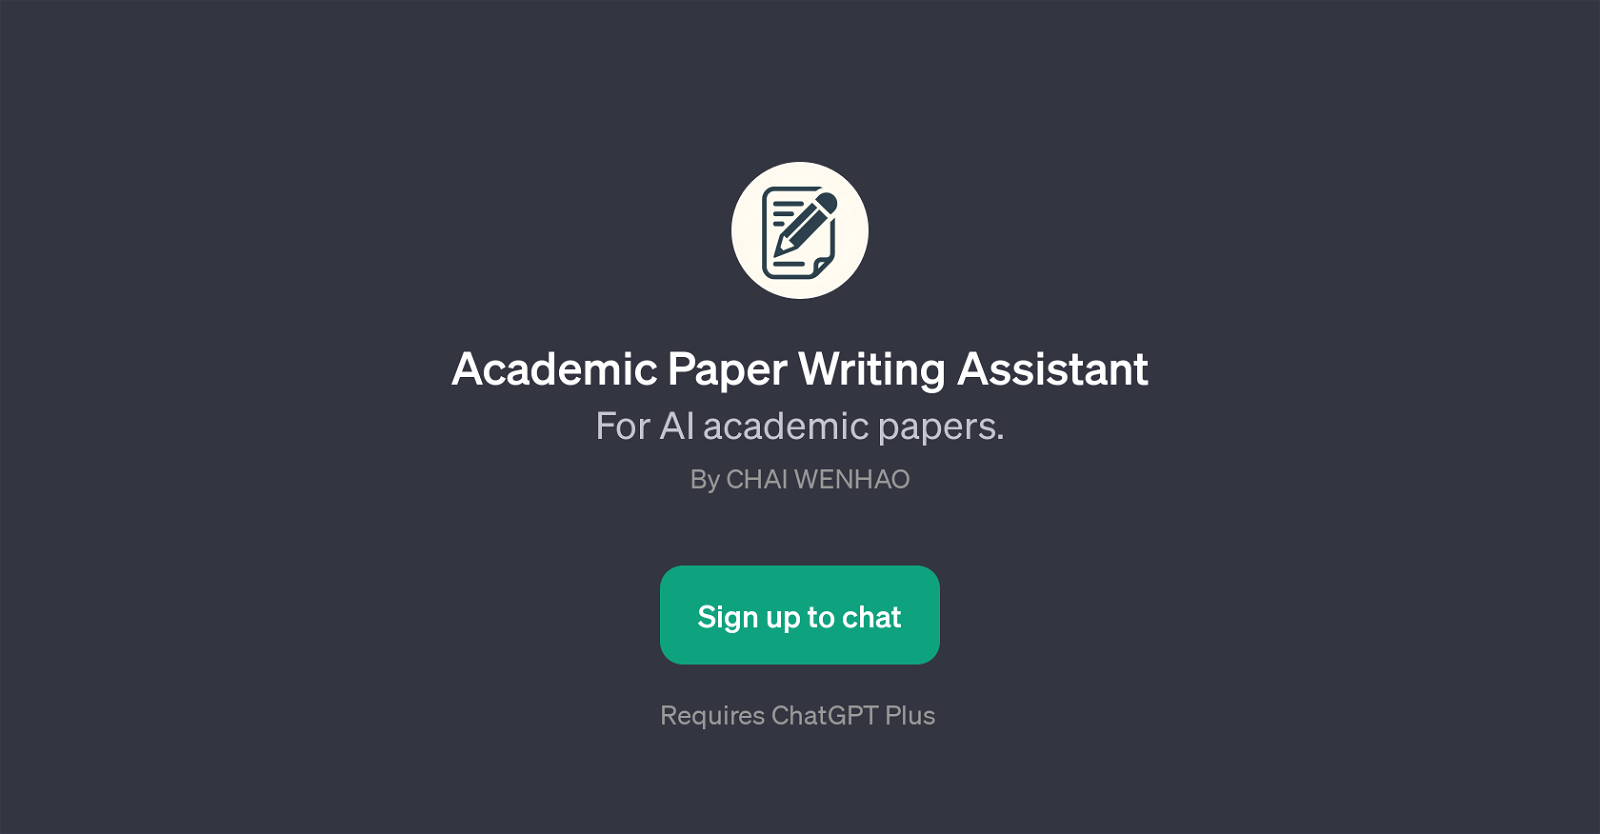 Academic Paper Writing Assistant website